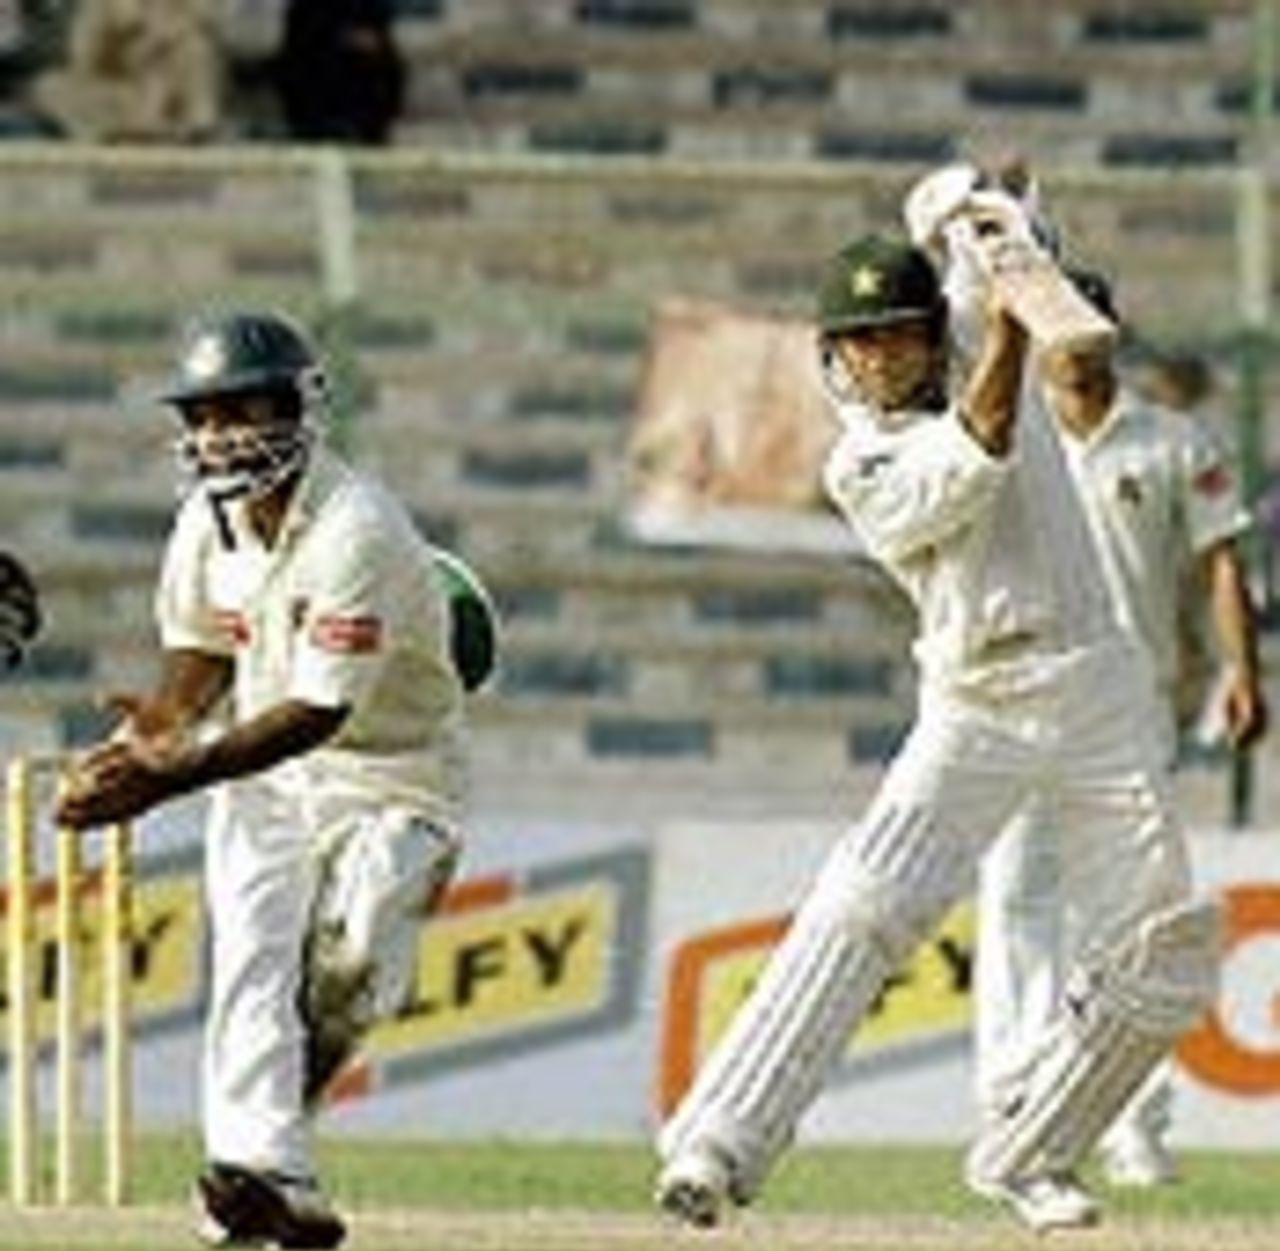 Yasir Hameed square-drives en route to his hundred in the second innings against Bangladesh at Karachi